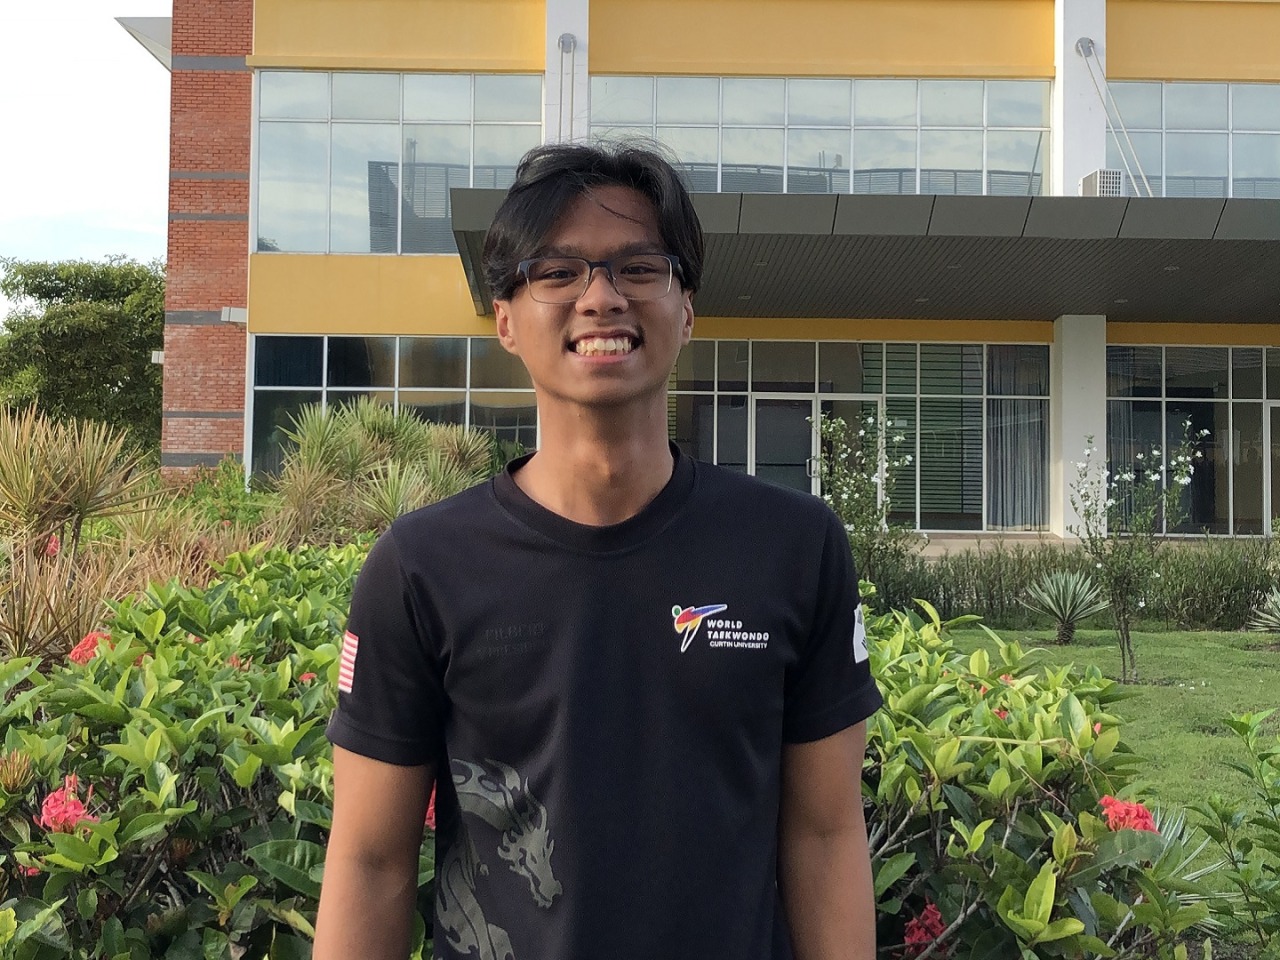 “After completing senior high school in Indonesia where I’m from, I was trying to decide which university I should go to. I actually had my sights on an Indonesian university, but my mum suggested I should study abroad, and that’s how I ended up...